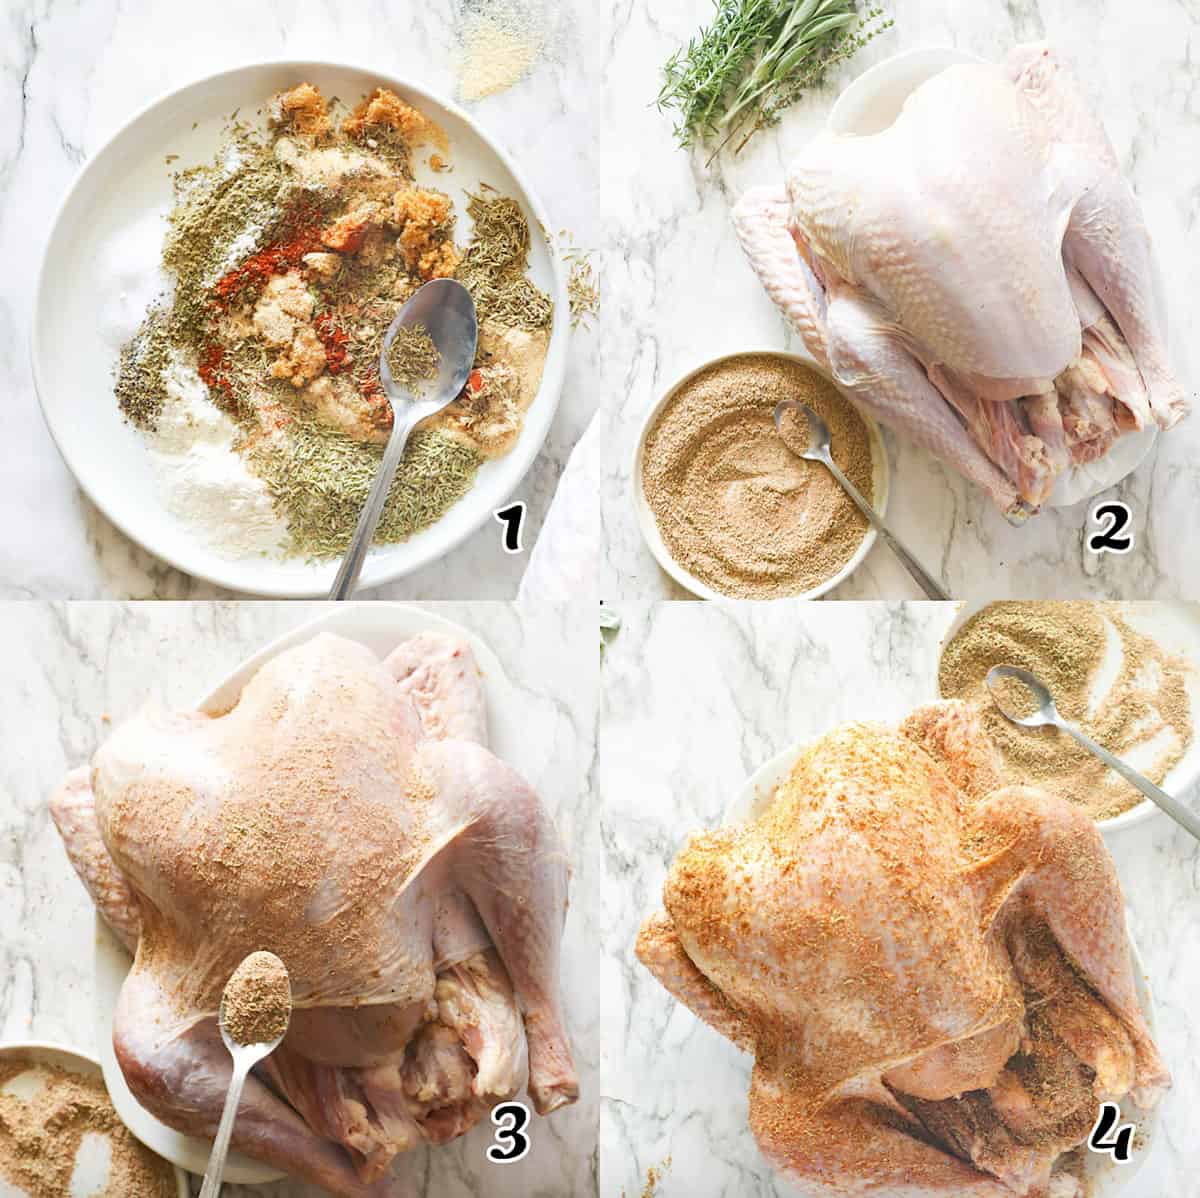 Mix the herbs and season the poultry